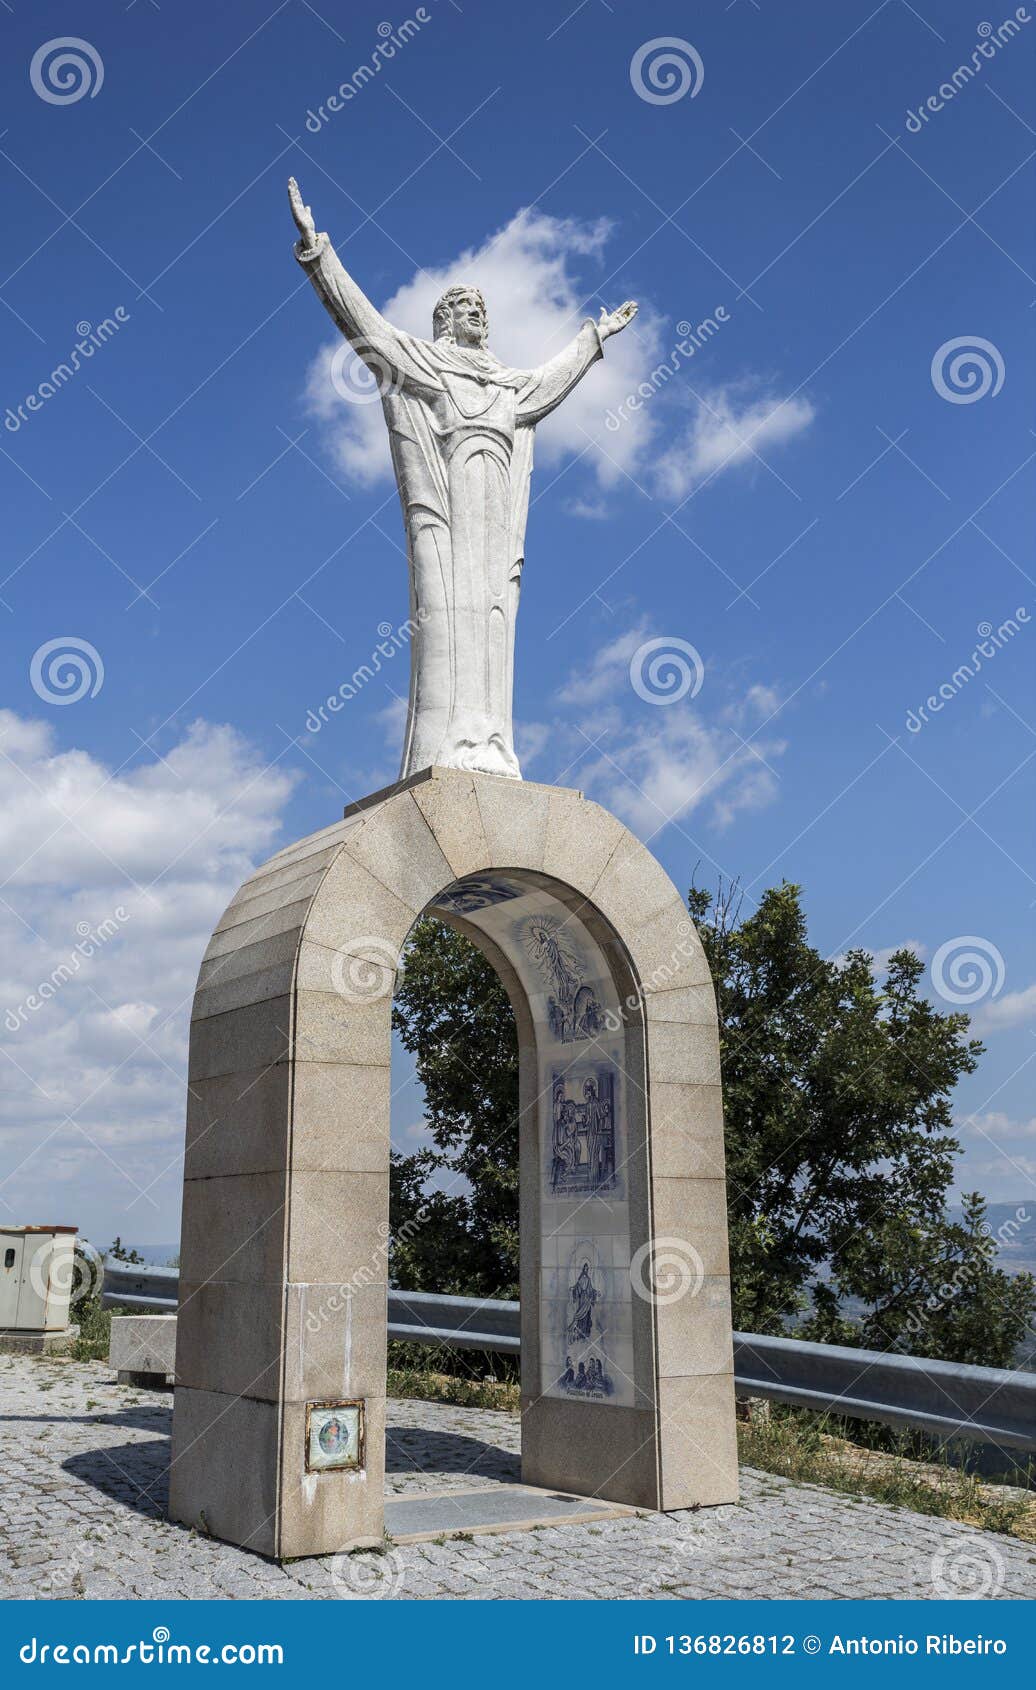 statue of christ, the king